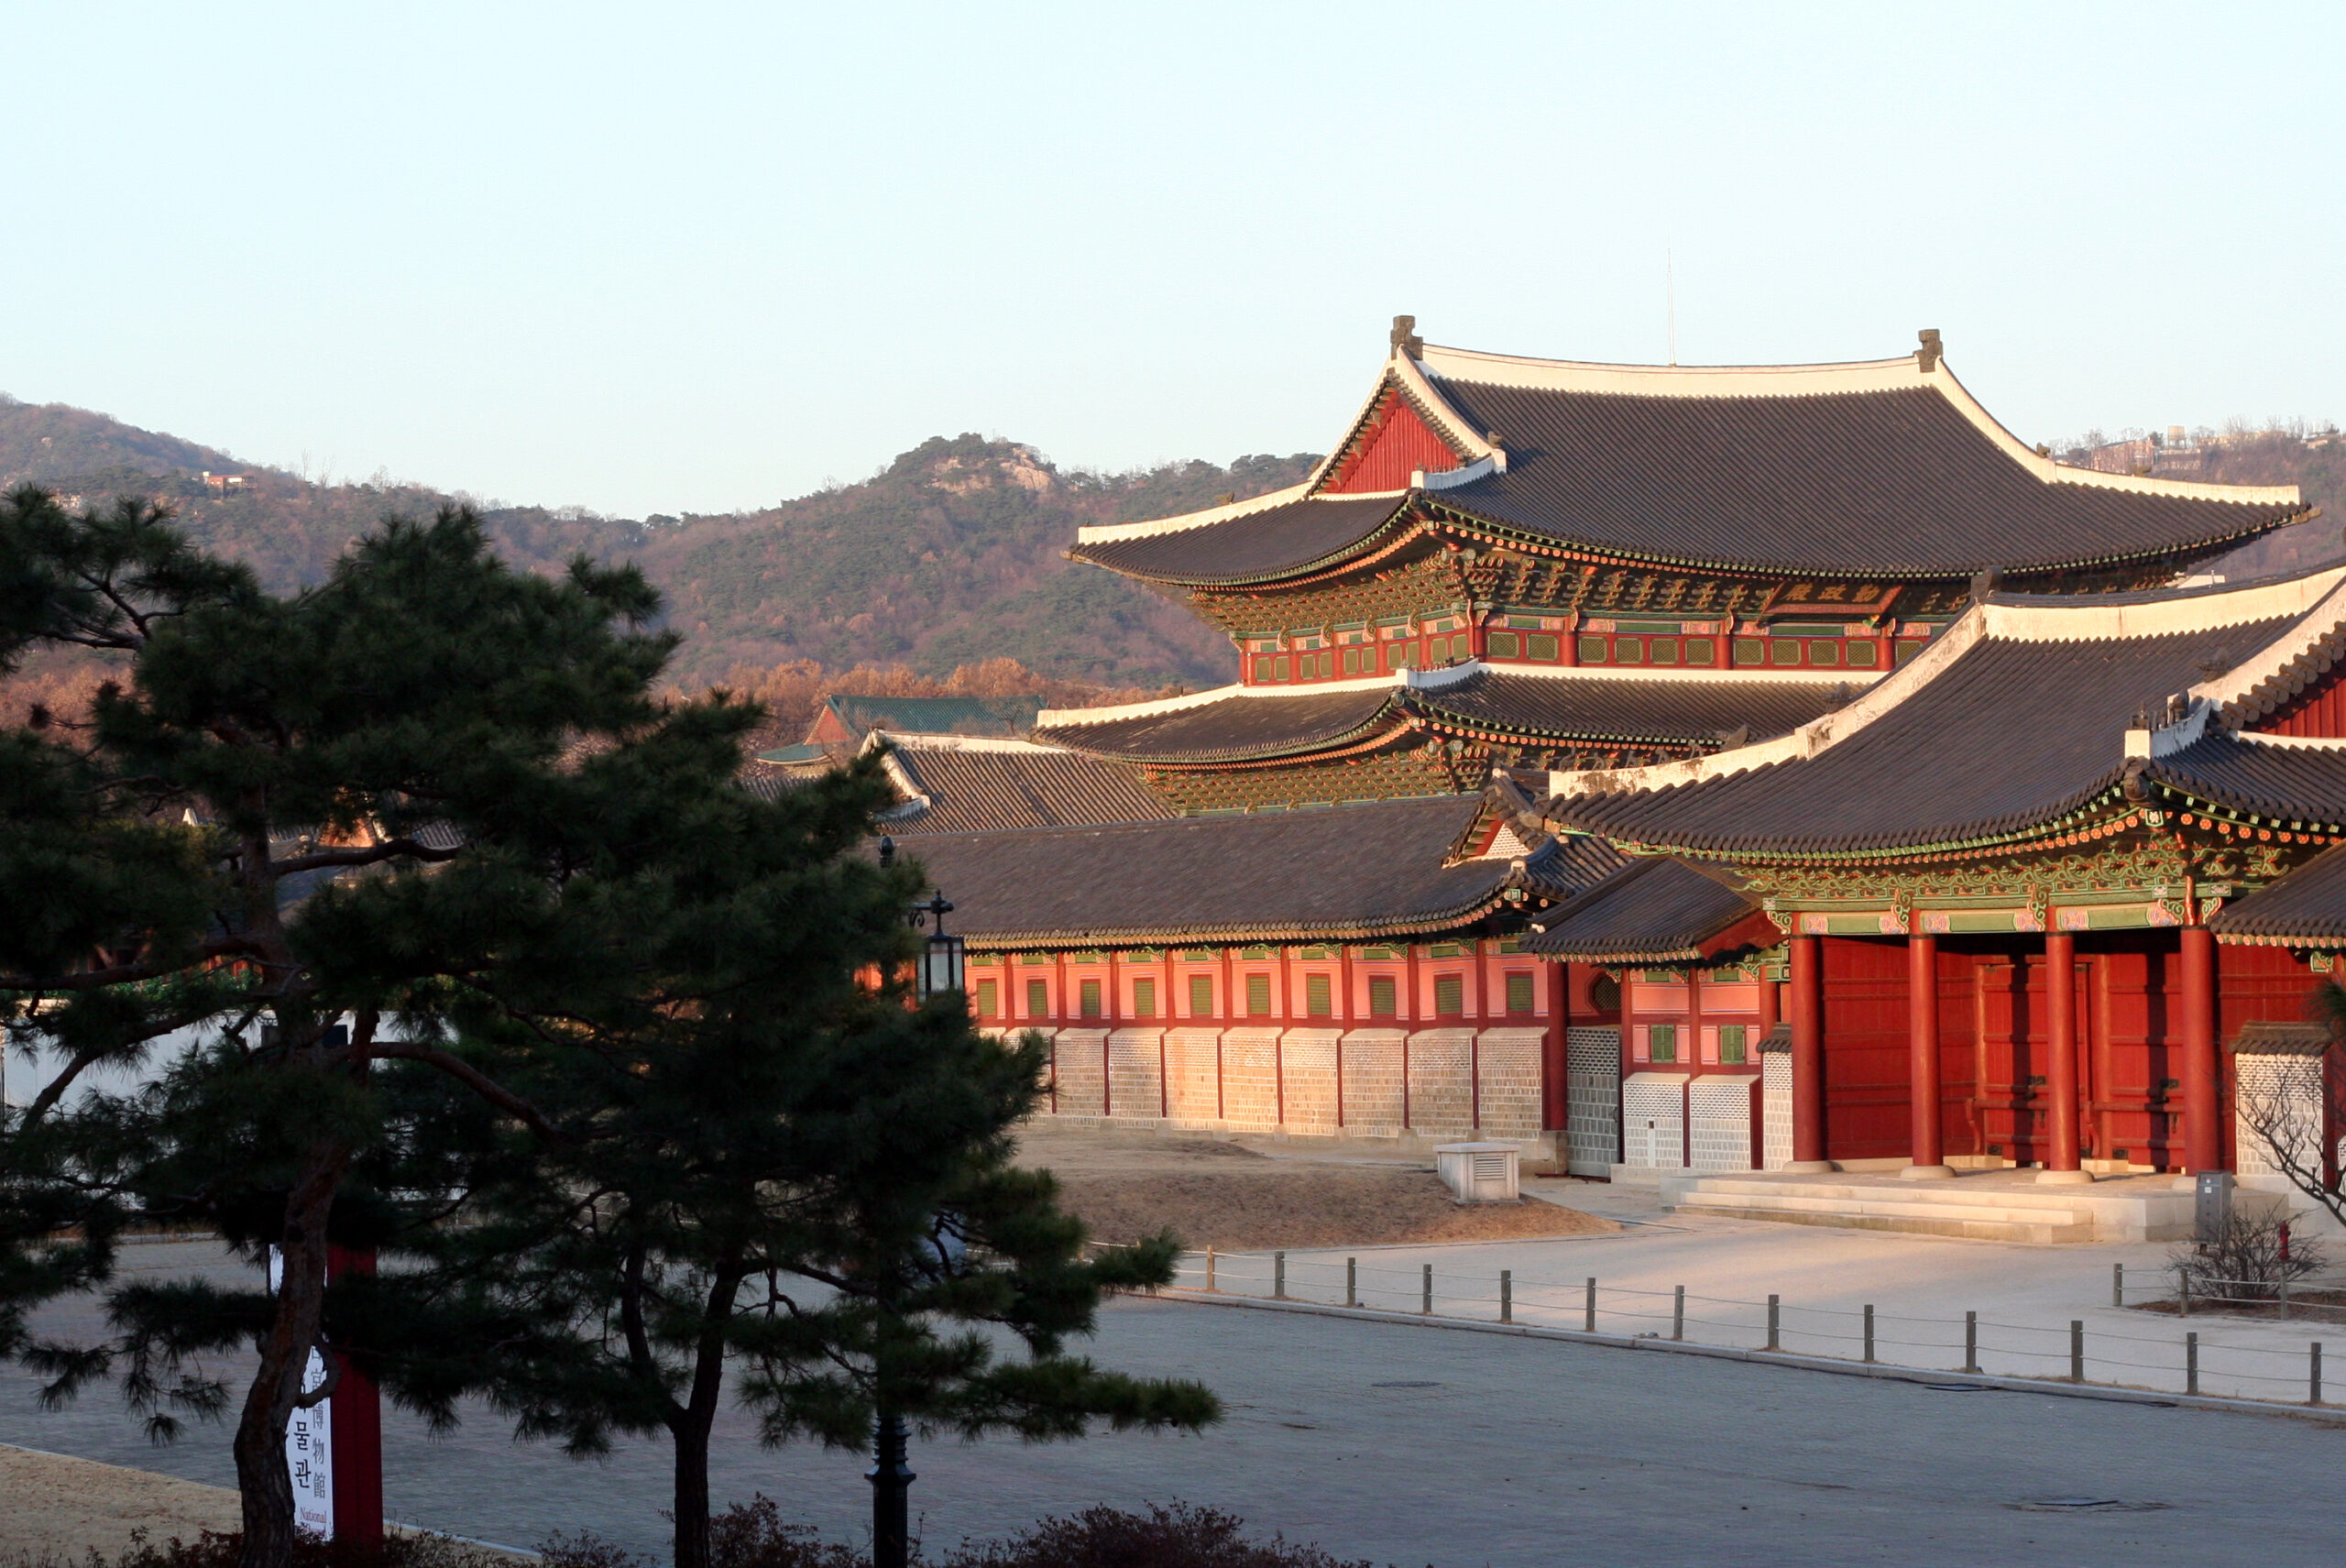 Tree in foreground of an image of Gyeongbokung Palace.